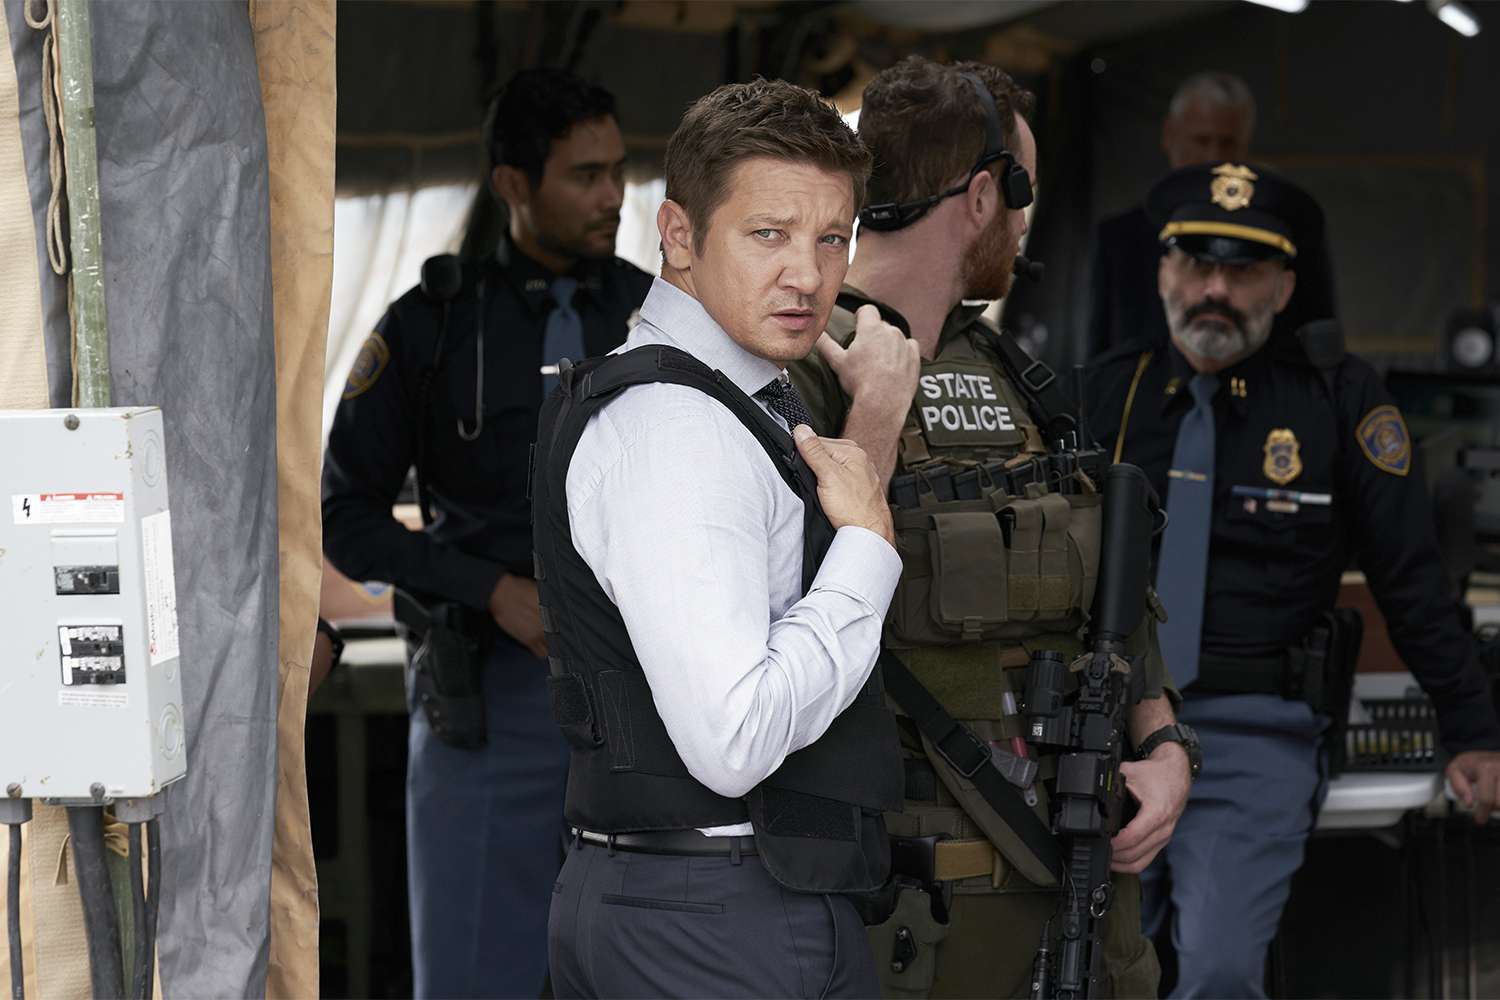 Pictured: Jeremy Renner as Mike of the Paramount+ series MAYOR OF KINGSTOWN. Photo Cr: Marni Grossman/ViacomCBS Â©2021 MTV Entertainment Group, Inc. All Rights Reserved.